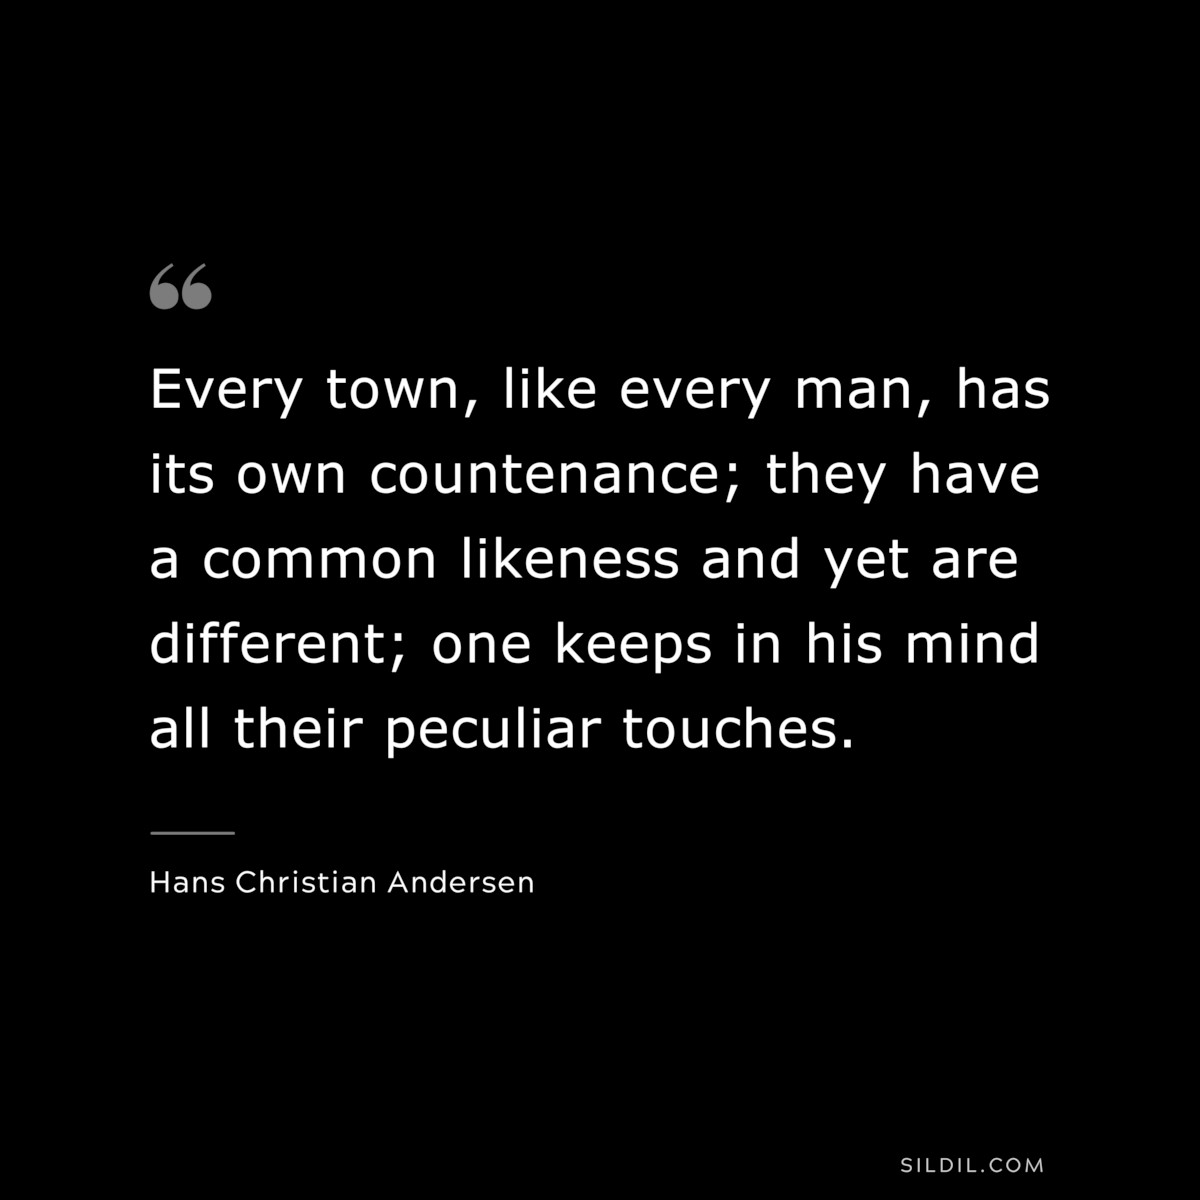 Every town, like every man, has its own countenance; they have a common likeness and yet are different; one keeps in his mind all their peculiar touches. ― Hans Christian Andersen